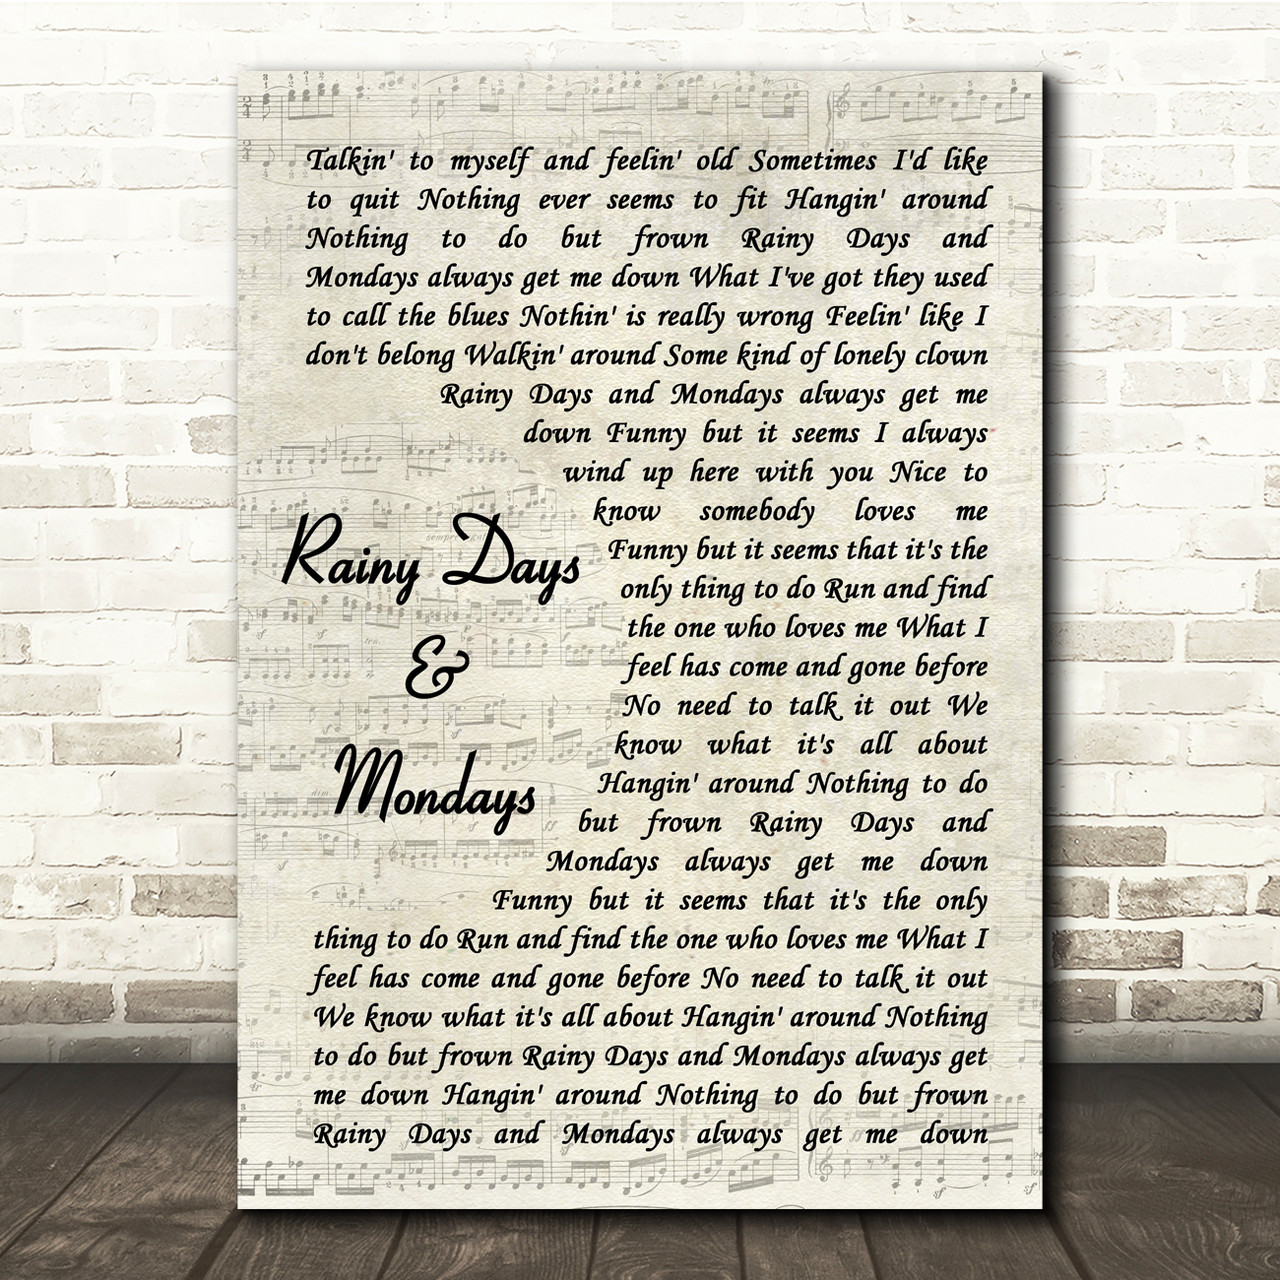 Rainy Days And Mondays - song and lyrics by Carpenters